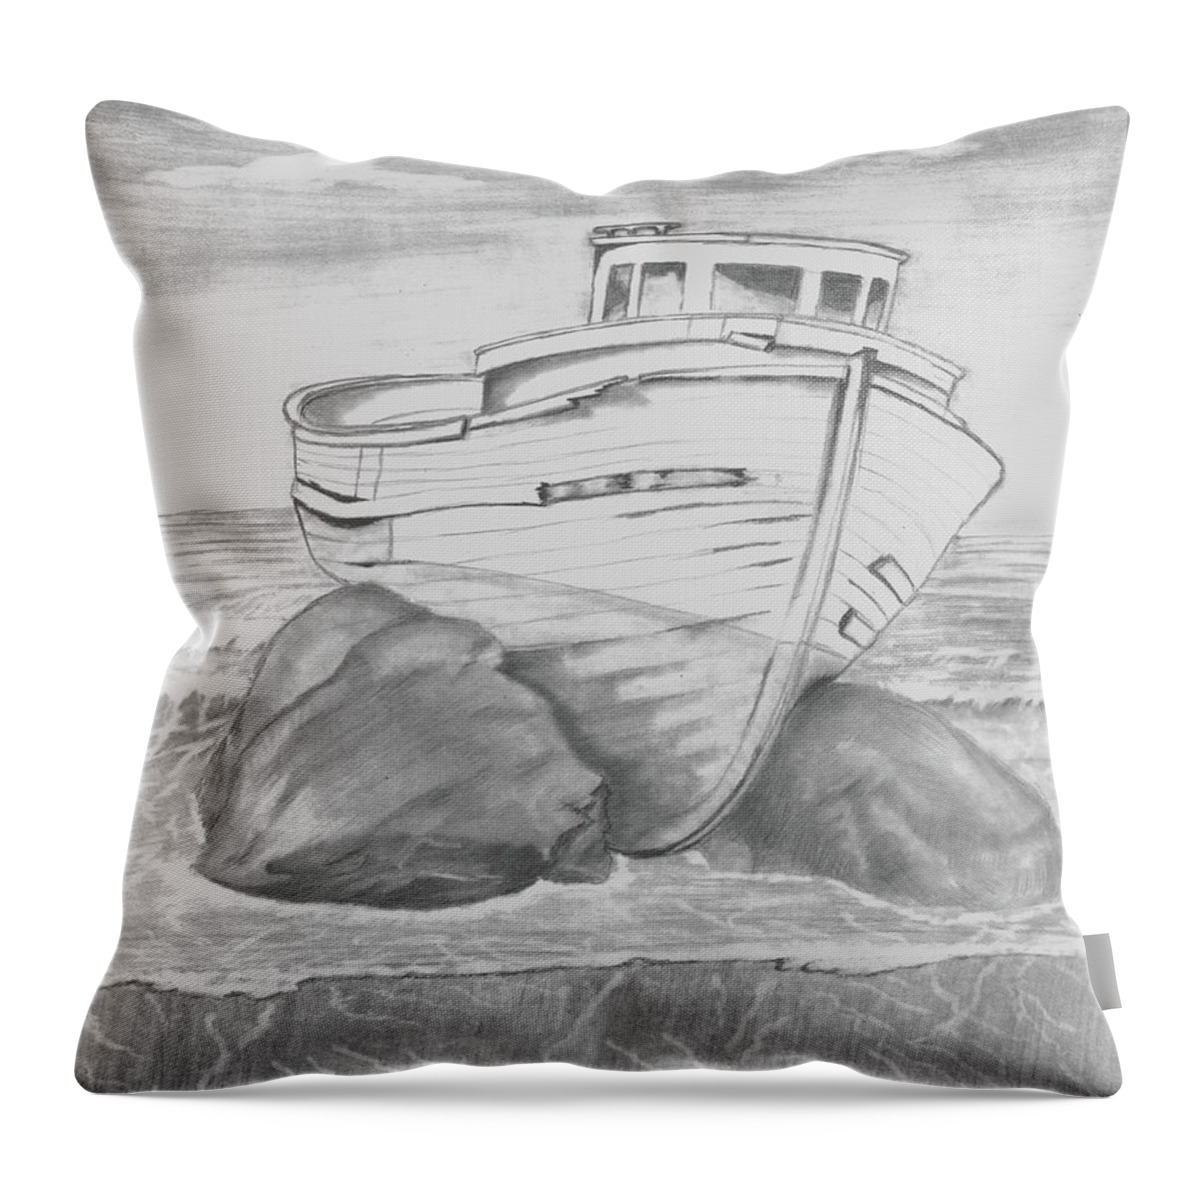 Ships Throw Pillow featuring the drawing Shipwreck by Terry Frederick